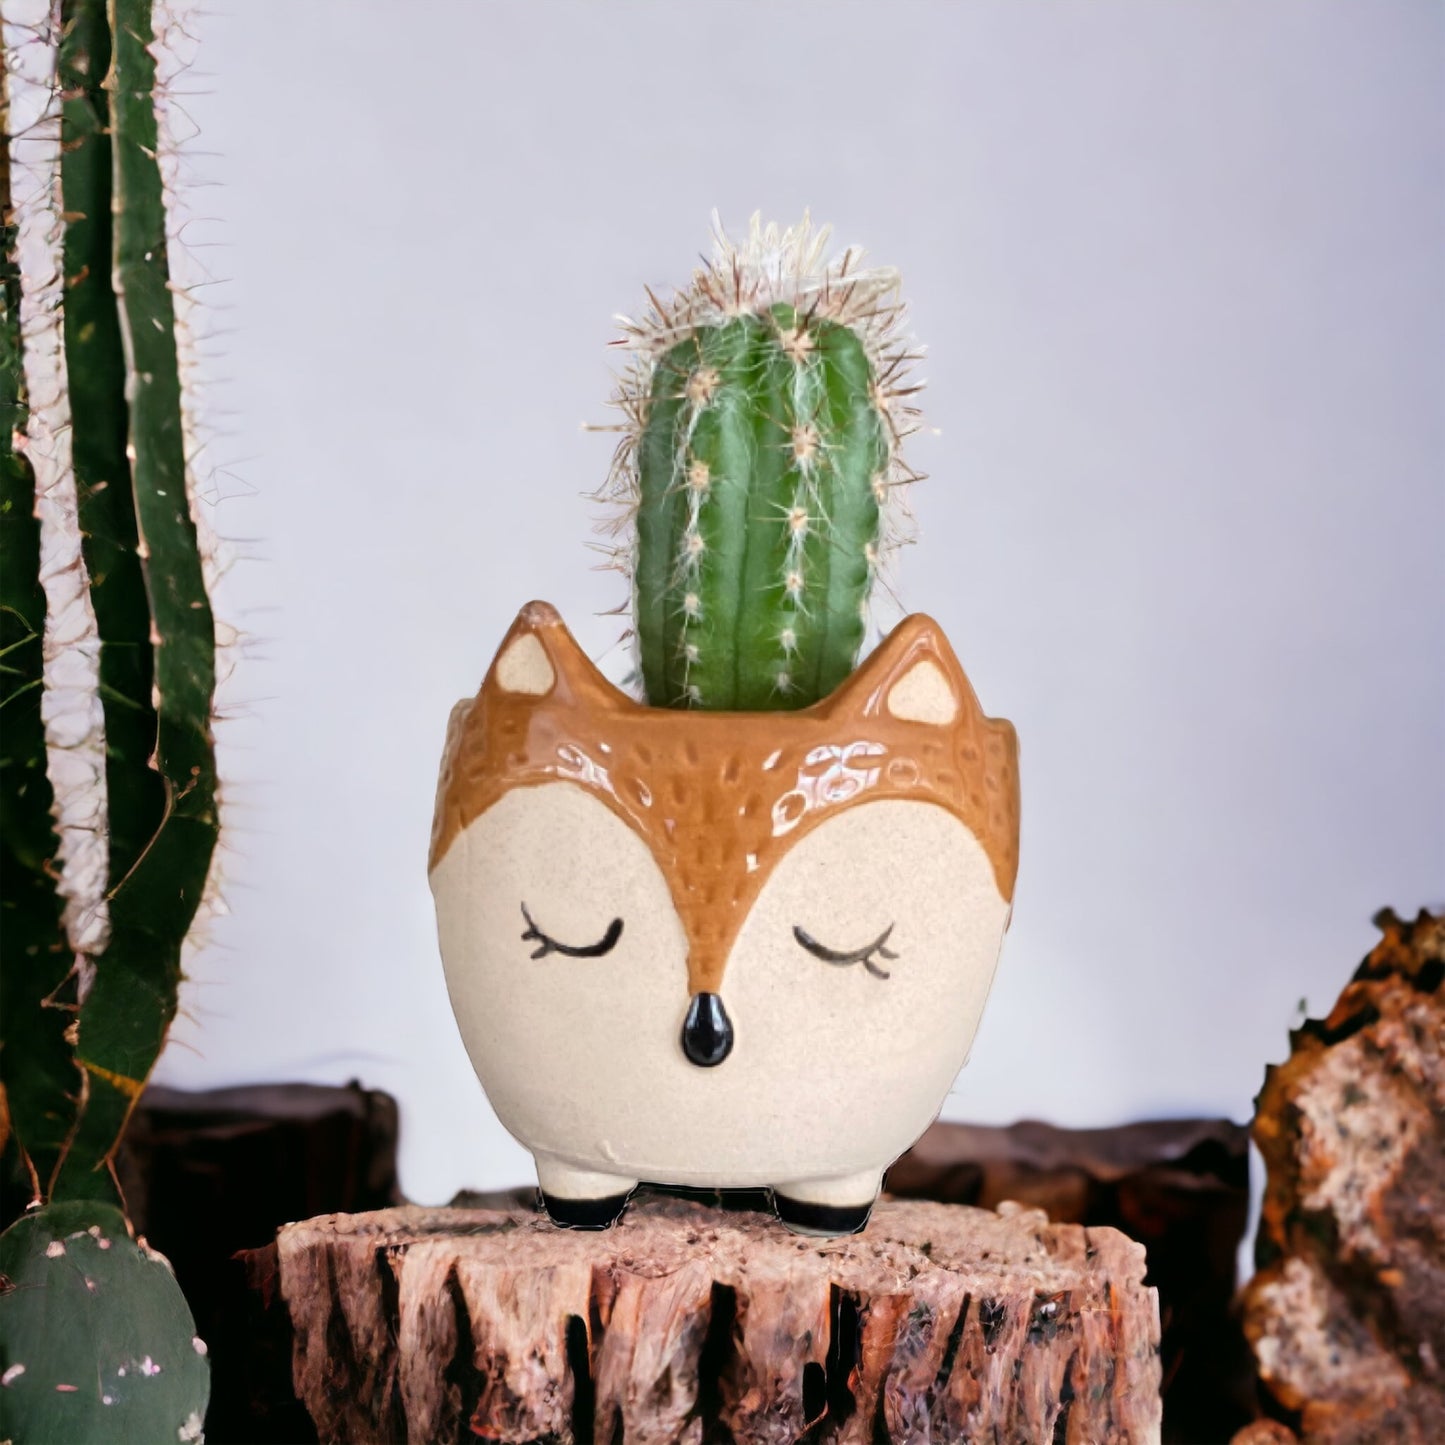 Plant Pot Planter Fox Foxy Love - The Renmy Store Homewares & Gifts 